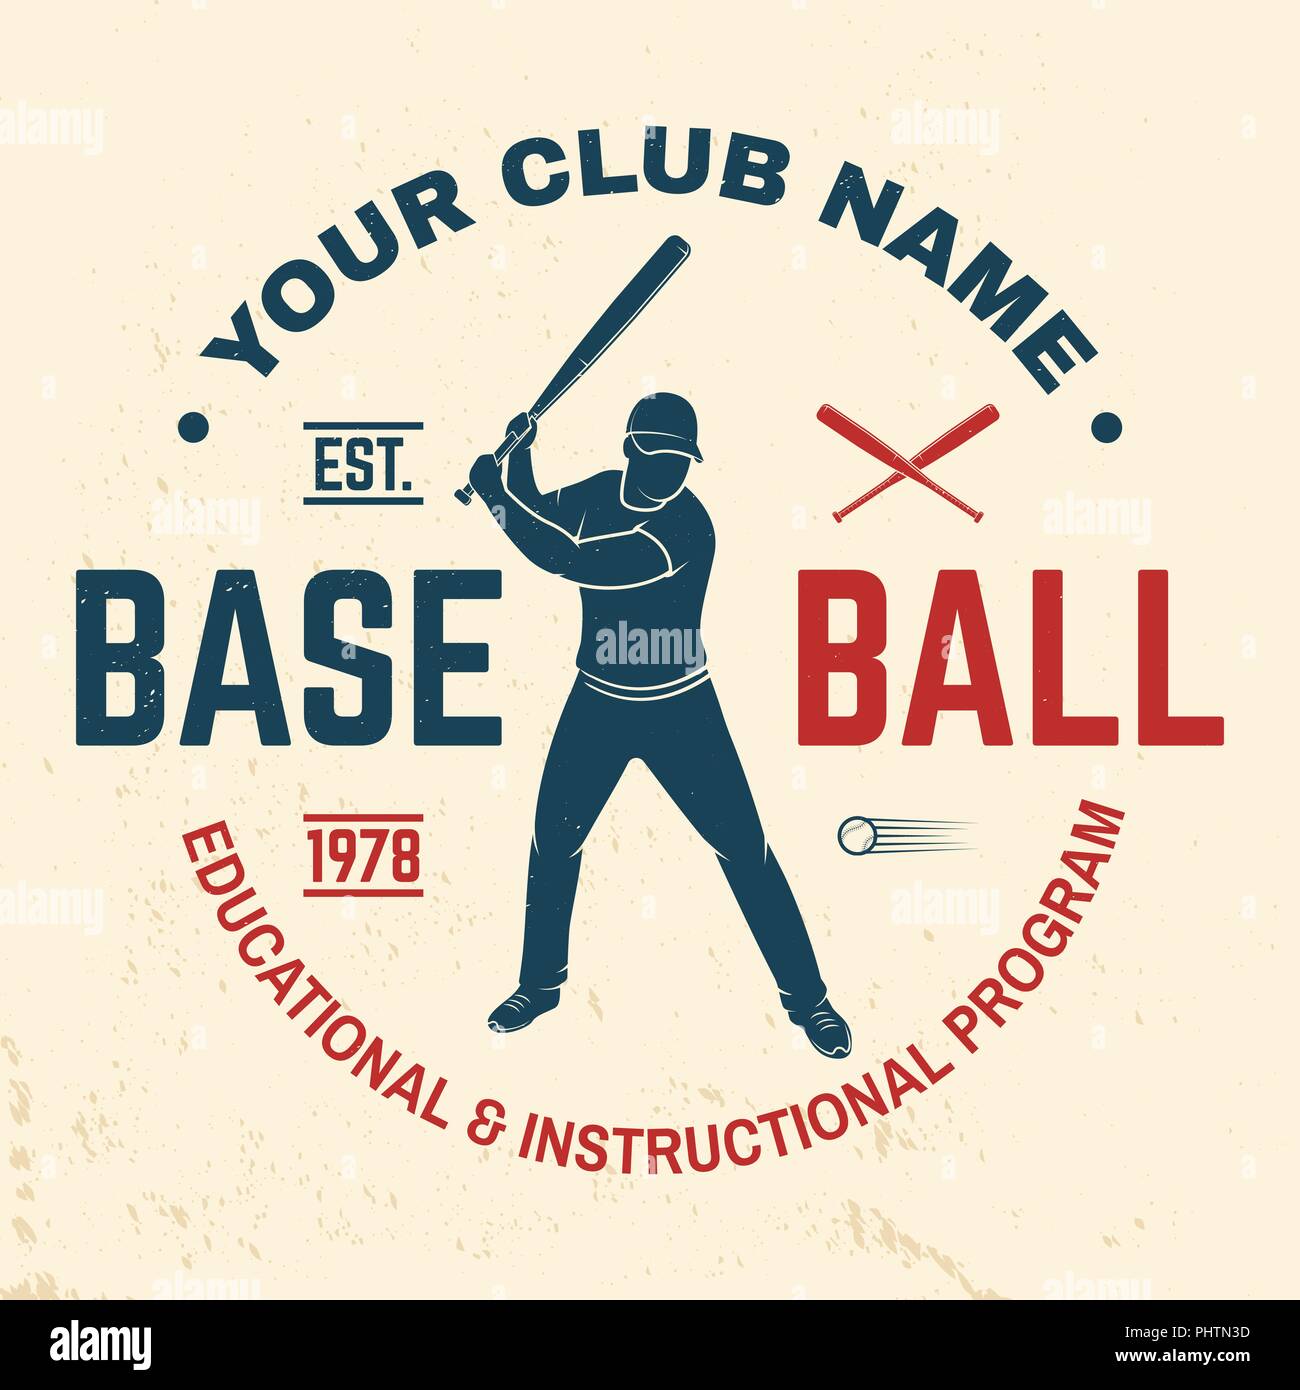 Baseball club badge. Vector illustration. Concept for shirt or logo, print, stamp or tee. Vintage typography design with baseball batter and ball for baseball silhouette. Stock Vector